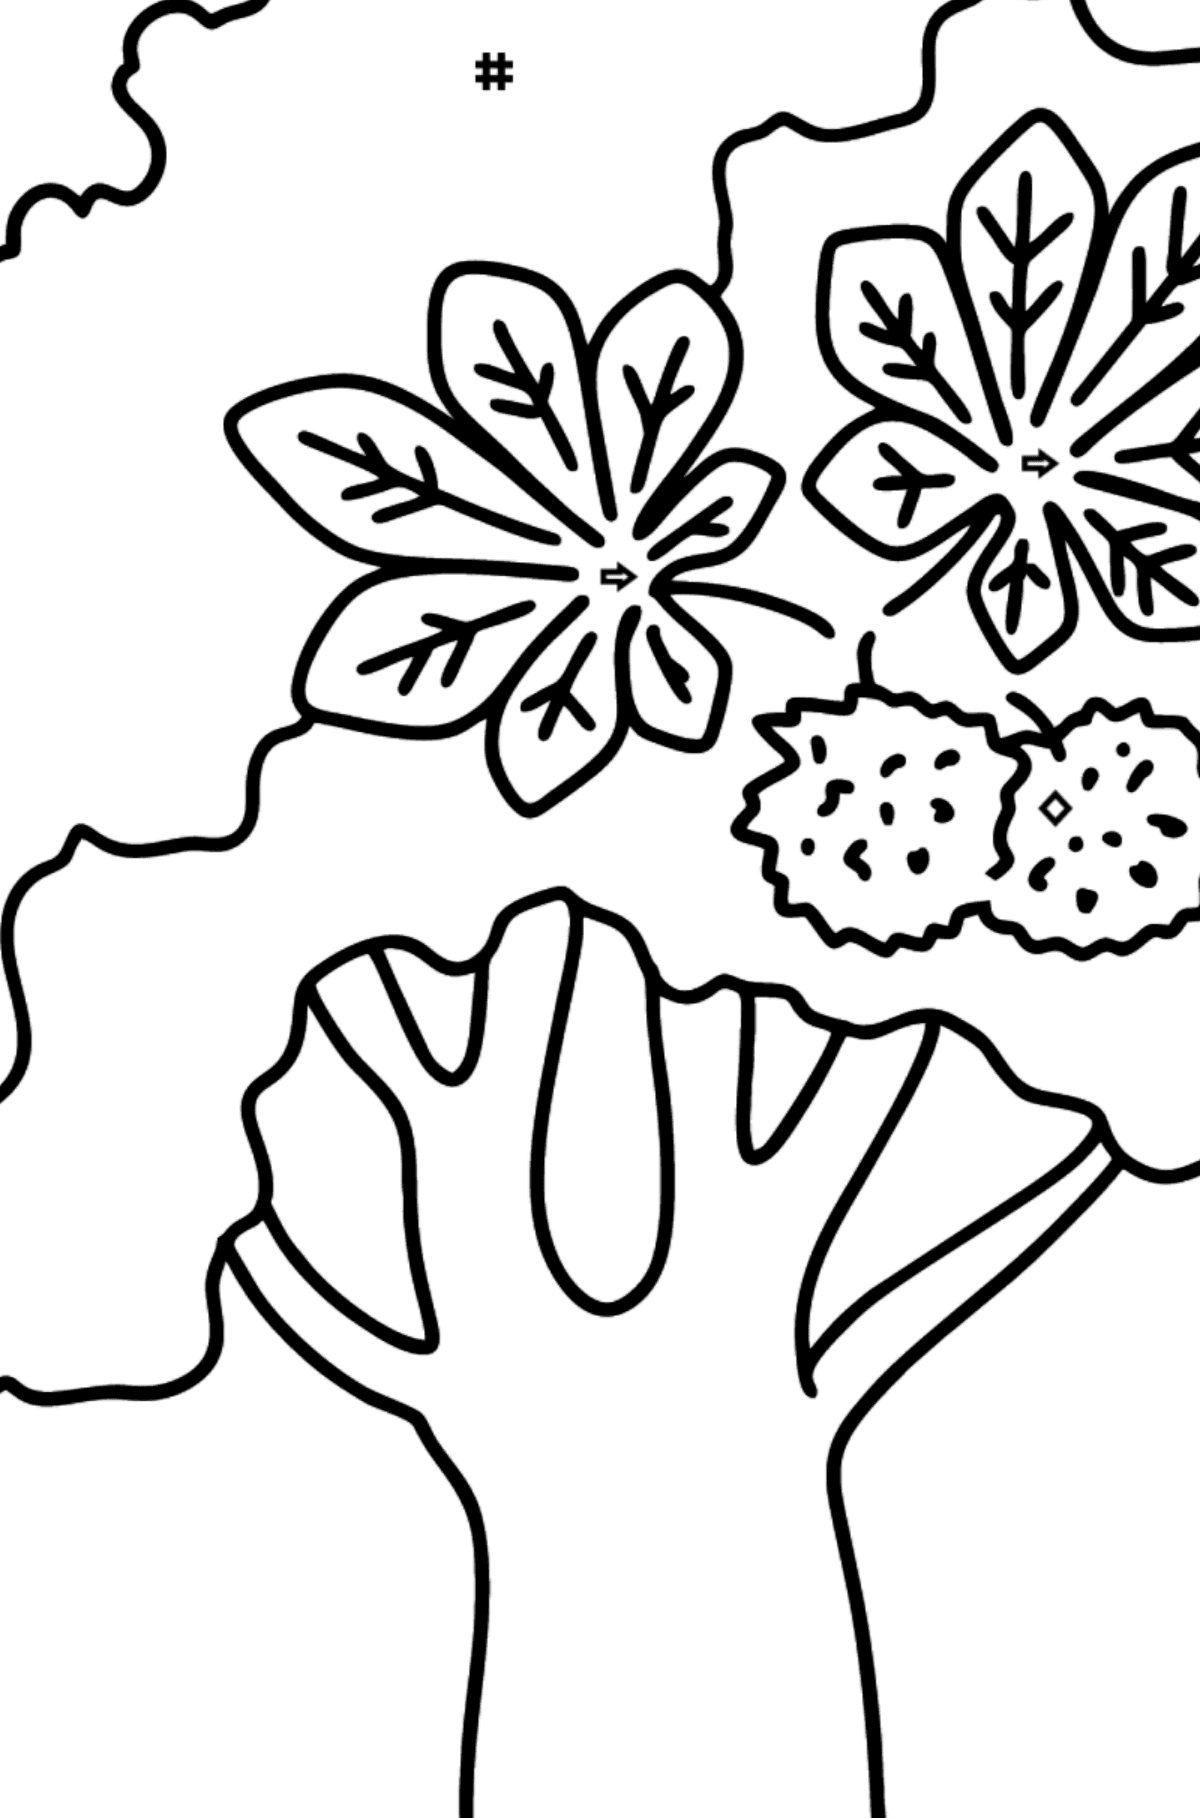 Chestnut coloring page - Coloring by Symbols and Geometric Shapes for Kids